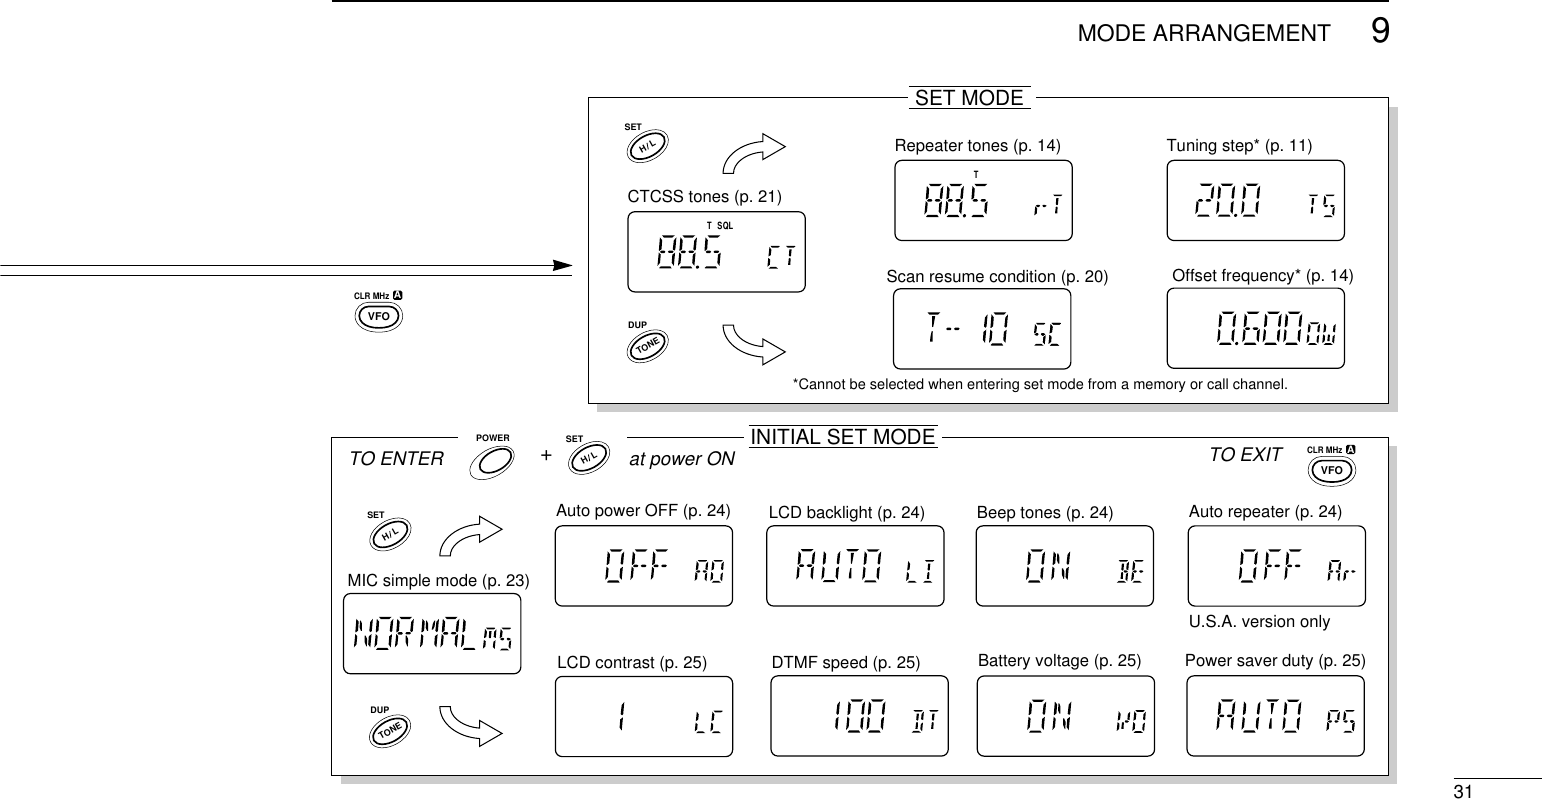 319MODE ARRANGEMENTSET MODEINITIAL SET MODEMIC simple mode (p. 23)Auto power OFF (p. 24) LCD backlight (p. 24)LCD contrast (p. 25) DTMF speed (p. 25)Offset frequency* (p. 14)Auto repeater (p. 24)U.S.A. version onlyBeep tones (p. 24)Battery voltage (p. 25)Tuning step* (p. 11)*Cannot be selected when entering set mode from a memory or call channel.Power saver duty (p. 25)Scan resume condition (p. 20) +TO ENTER at power ON TO EXITRepeater tones (p. 14)TCTCSS tones (p. 21)TSQLPOWERDUPSETTONEDUPTONEH  LSETH  LSETH  LCLR MHzVFOACLR MHzVFOA